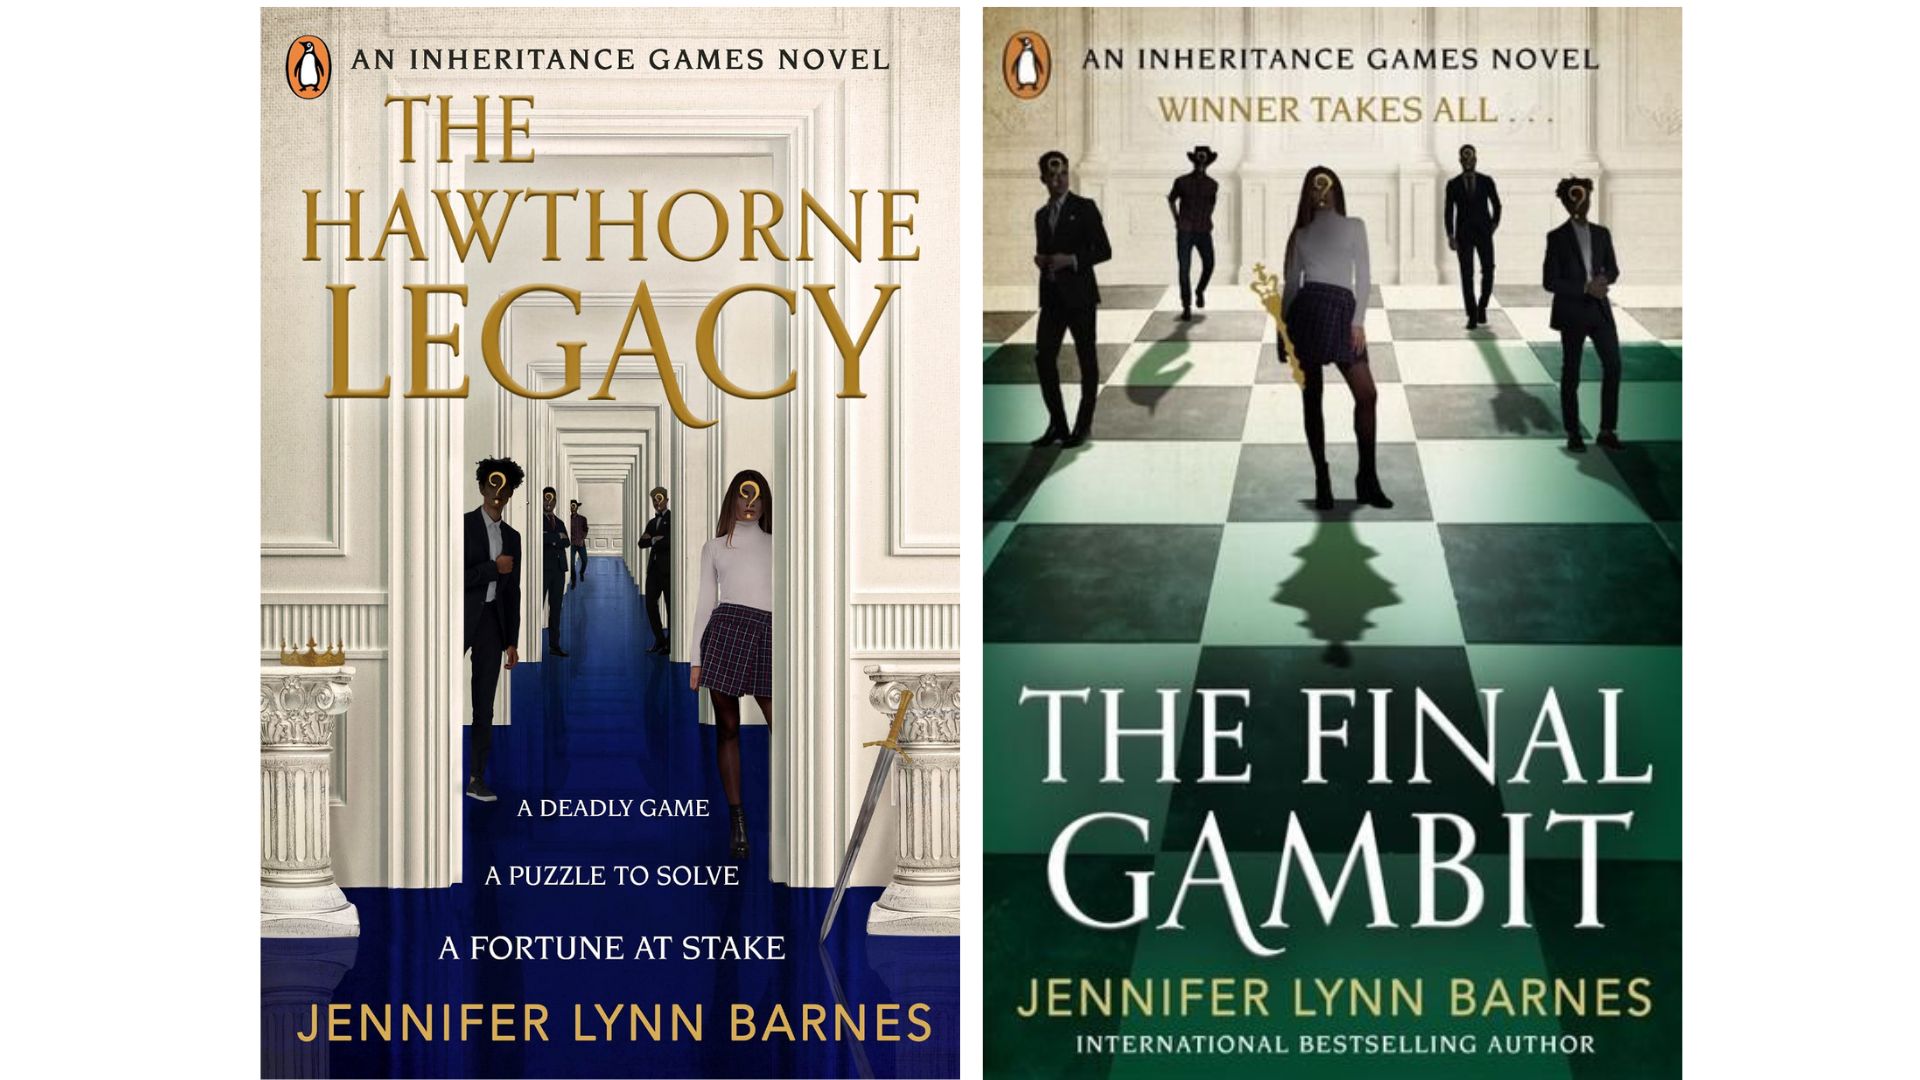 The Inheritance Games Trilogy Book Review